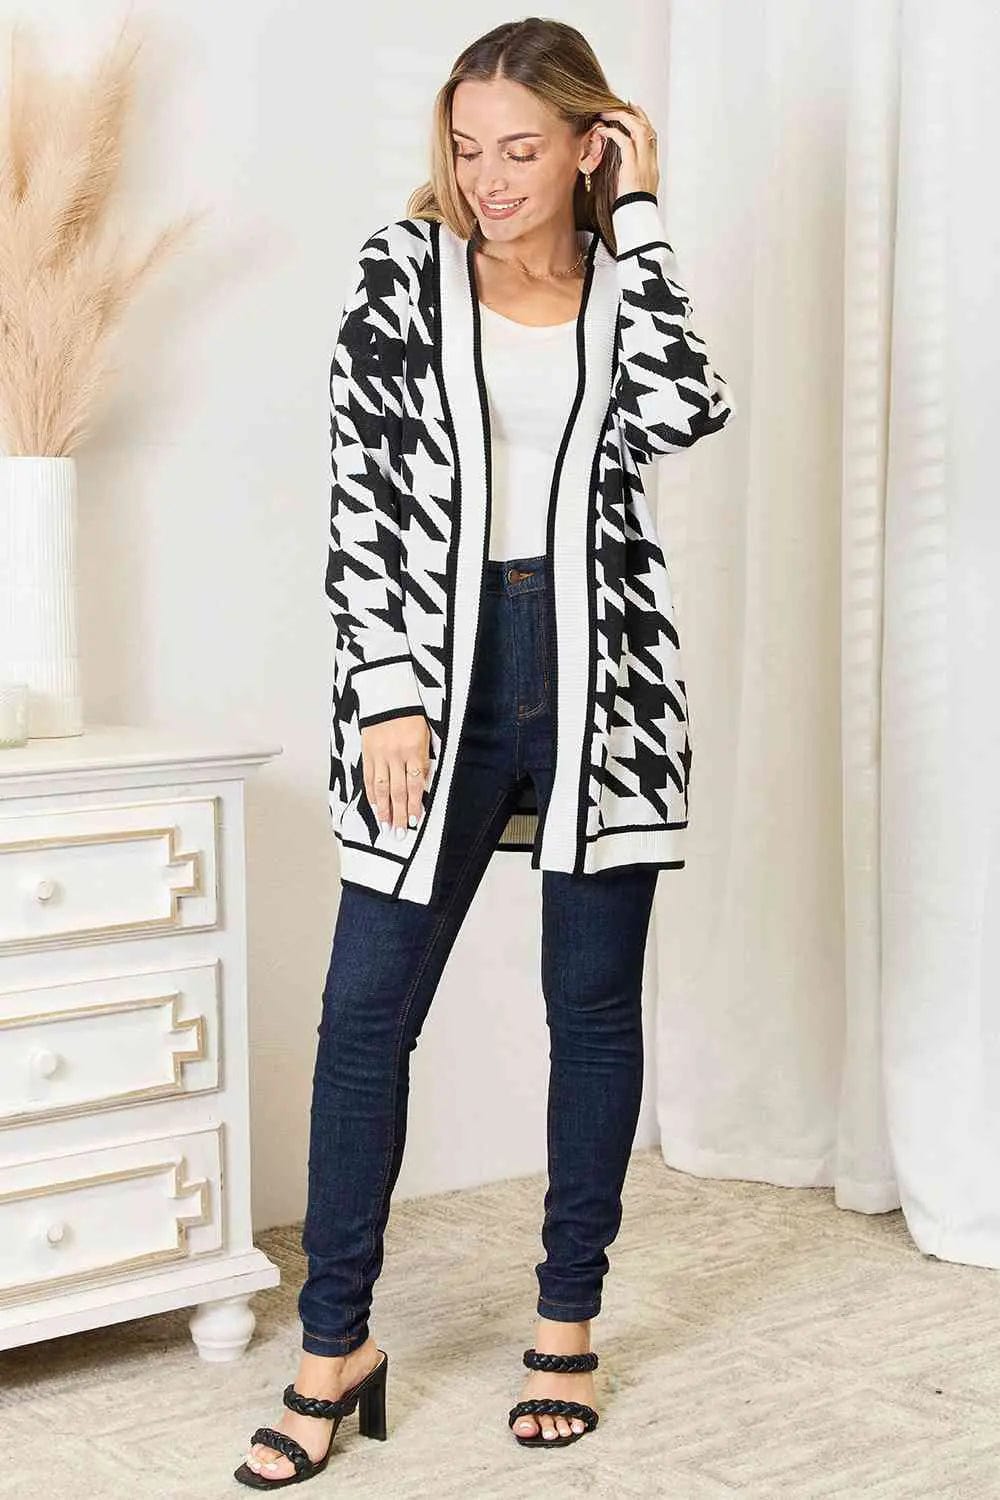 Woven Right Houndstooth Open Front Longline Cardigan Women  MPGD Corp Merchandise